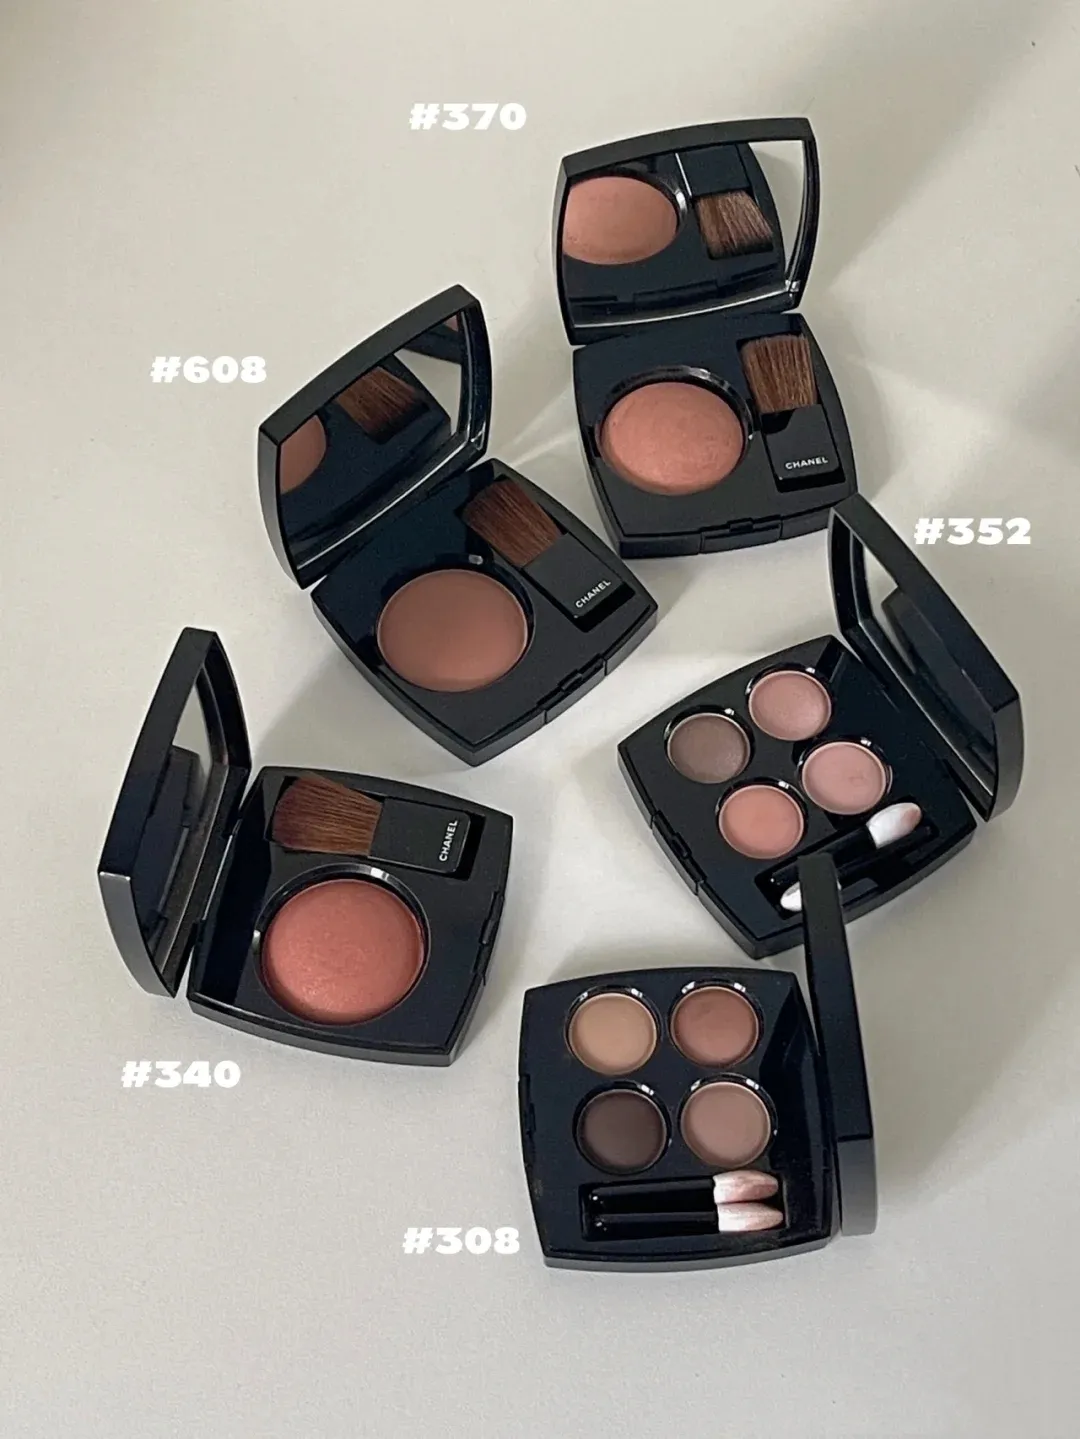 My current makeup favorites from Chanel, Gallery posted by aliana marìe